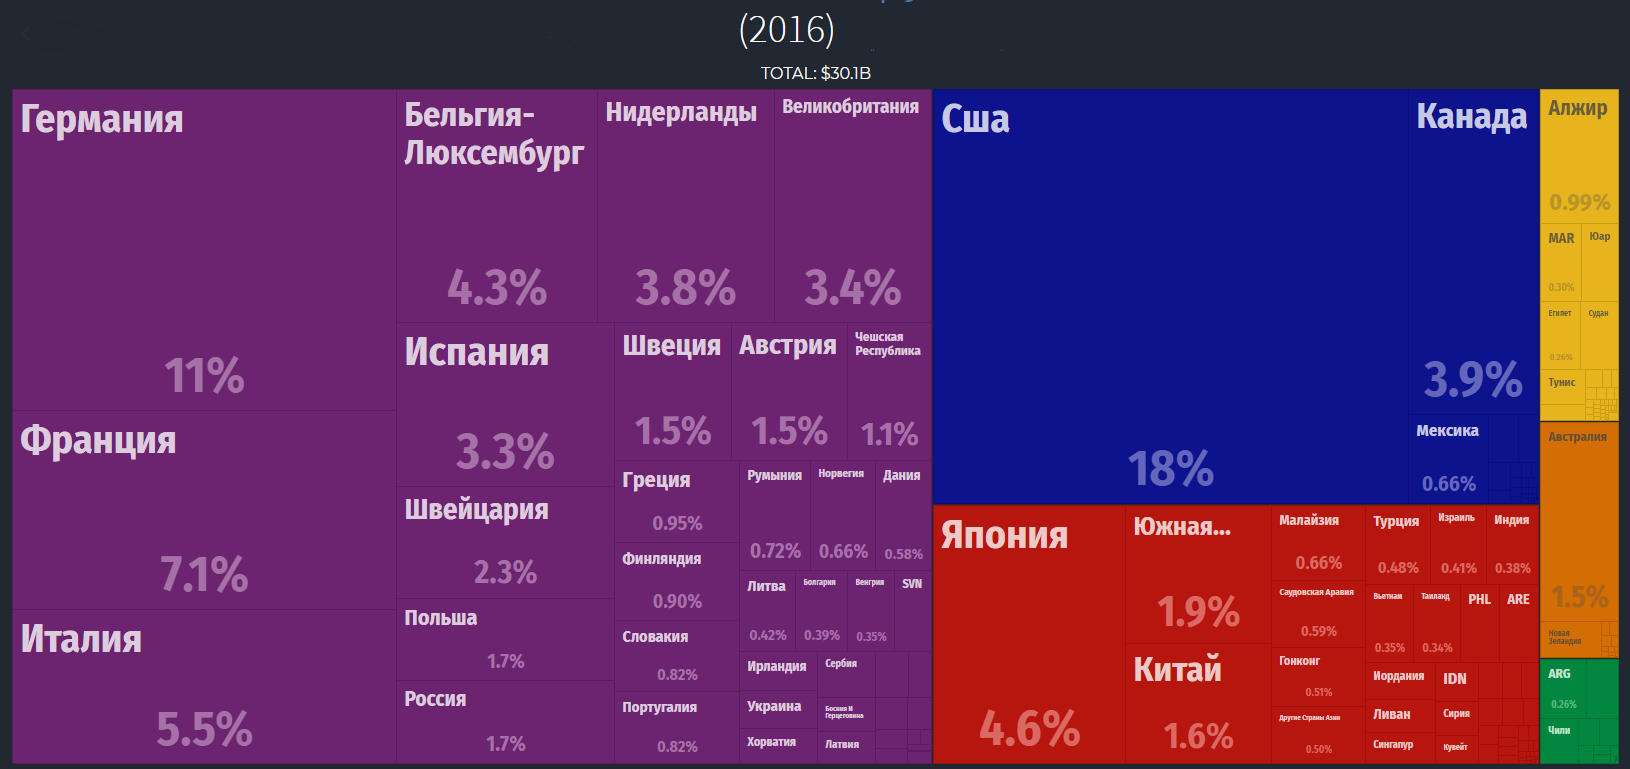 Where Russian imports of coffee